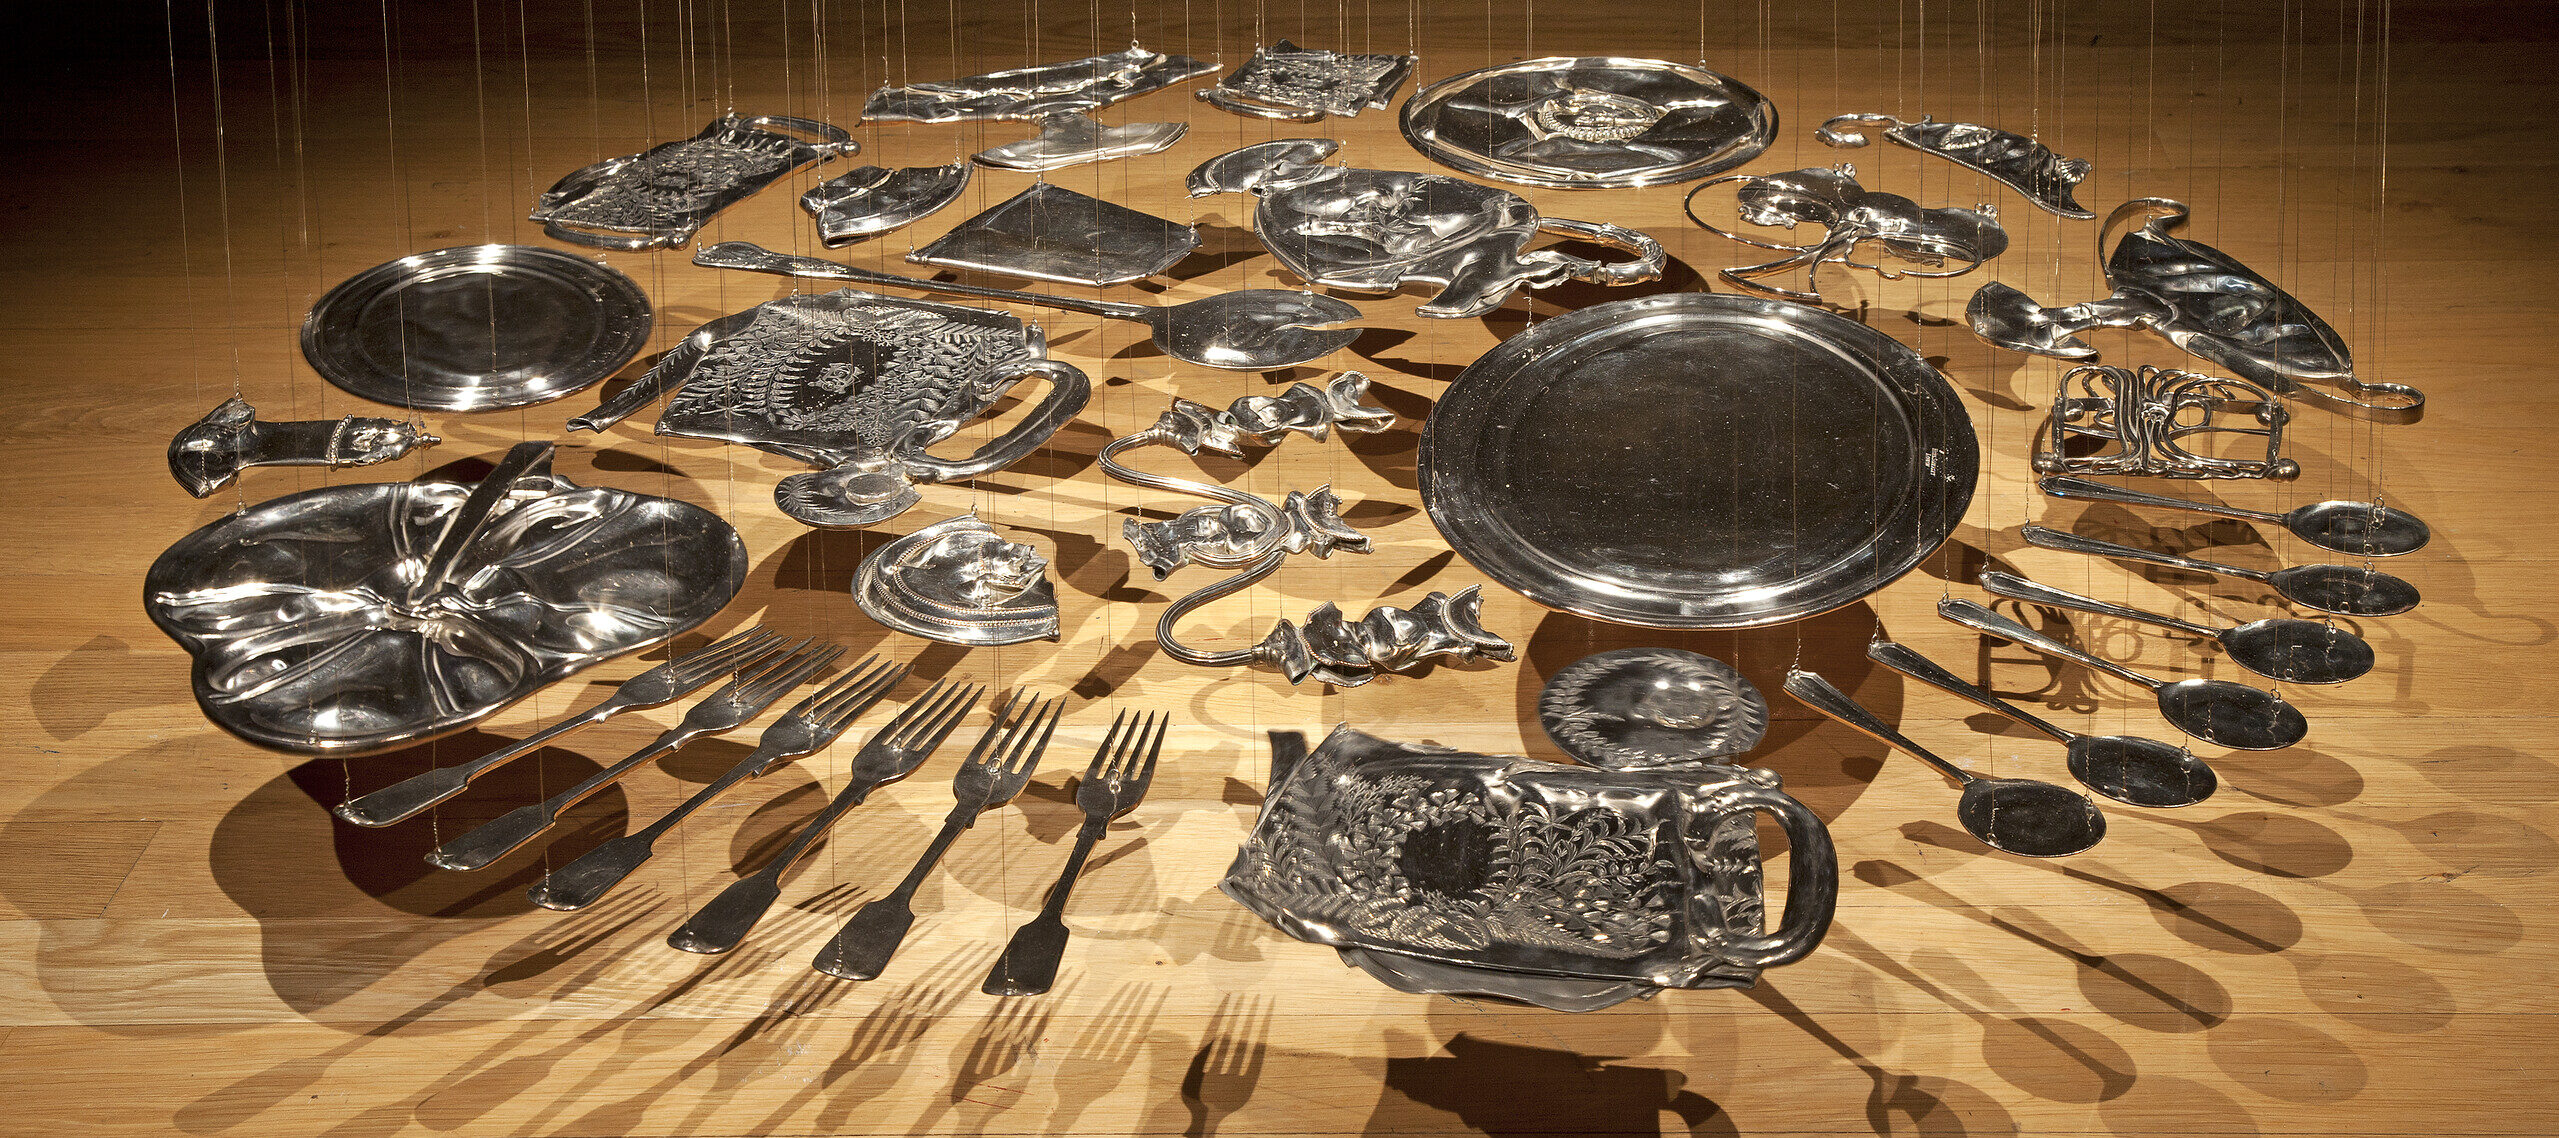 Thirty silver-plated items, including spoons, forks, trays, and various serving ware, are flattened and hang suspended from the ceiling with thin, nearly invisible wire. The pieces are arranged in a circle several inches above the floor.